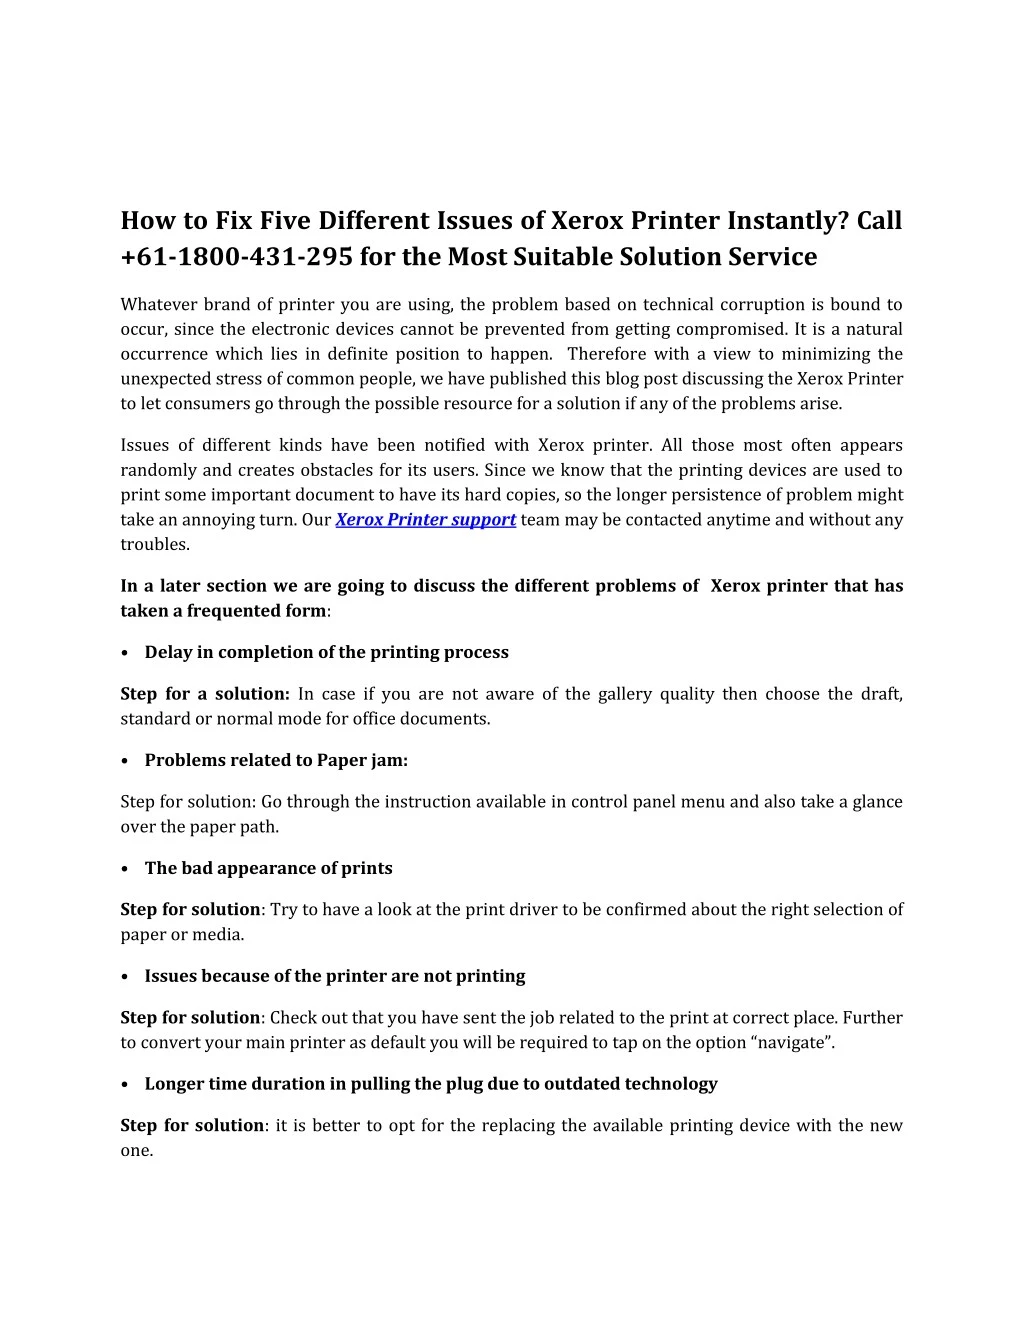 how to fix five different issues of xerox printer